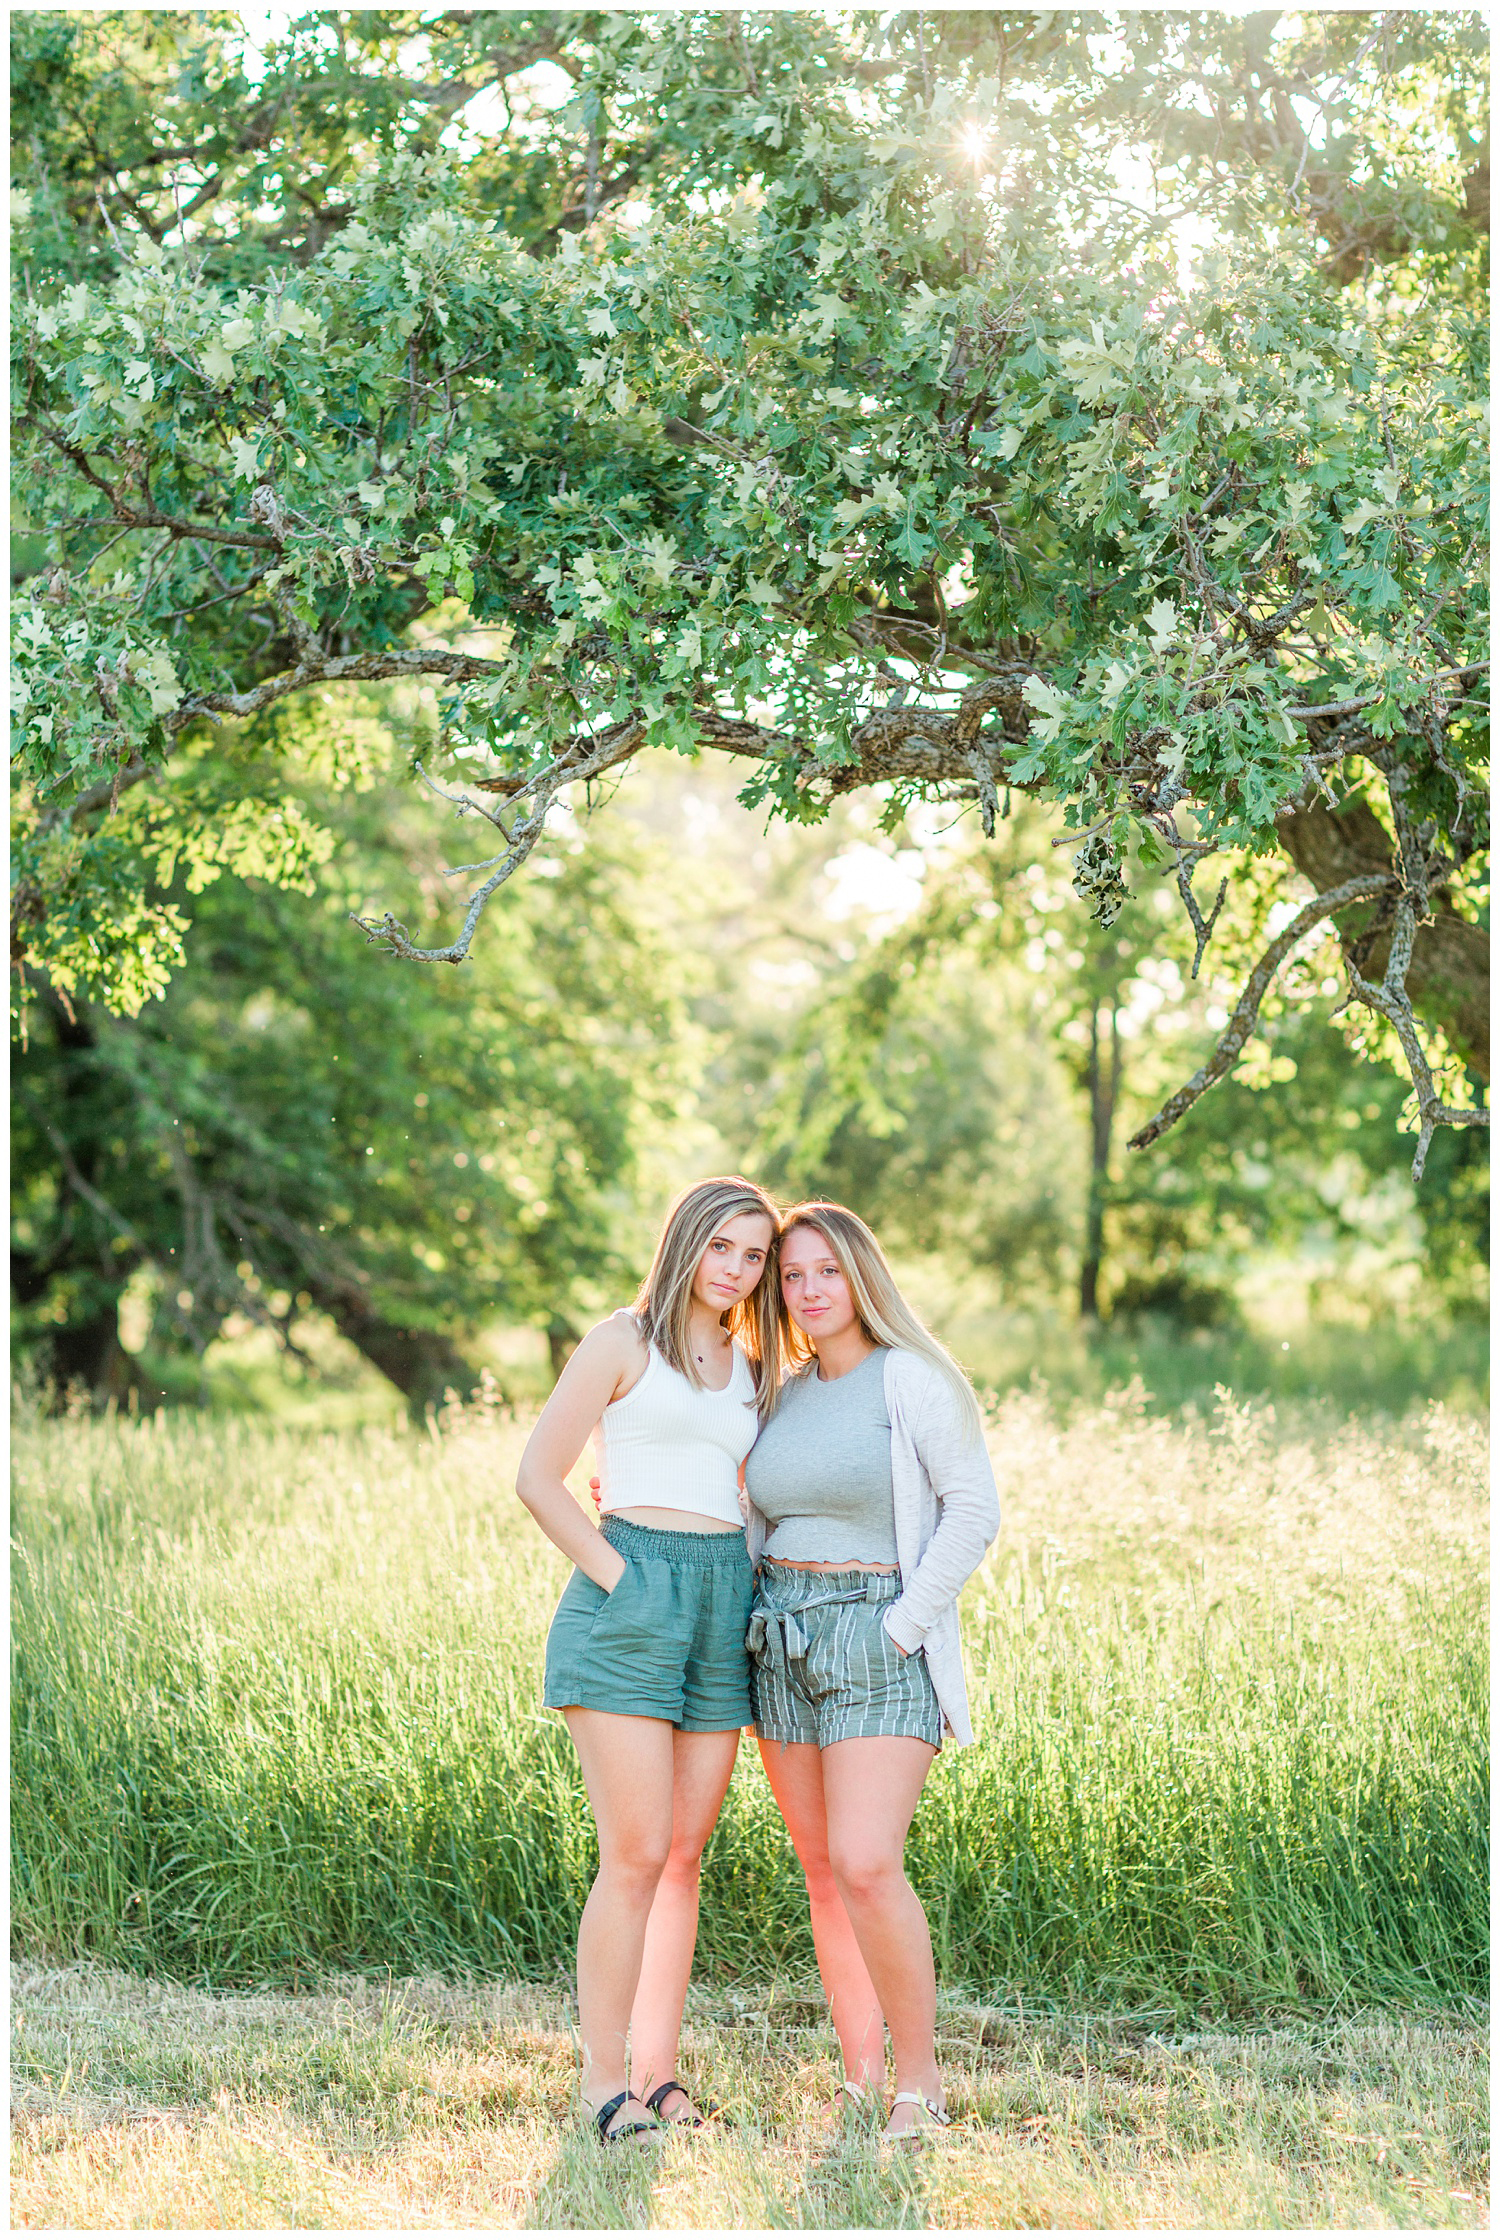 Senior girls best friends BFFs embrace in a grassy field on a rural Iowa farm with glowing, bright and airy lighting | CB Studio